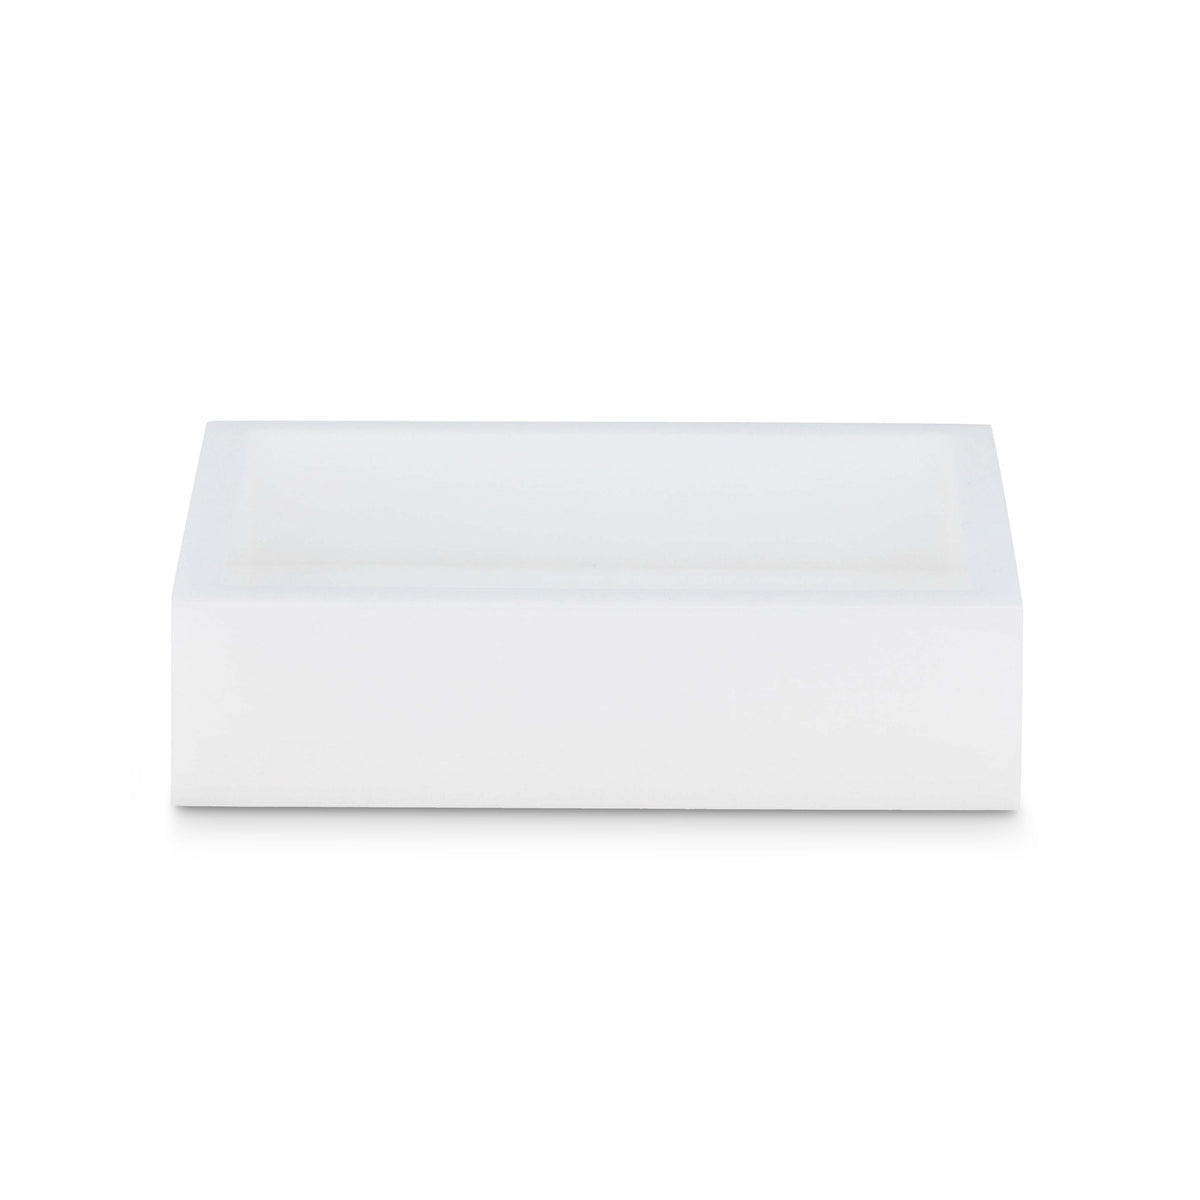 Mike + Ally - Ice White Soap Dish - 31631 - White - 